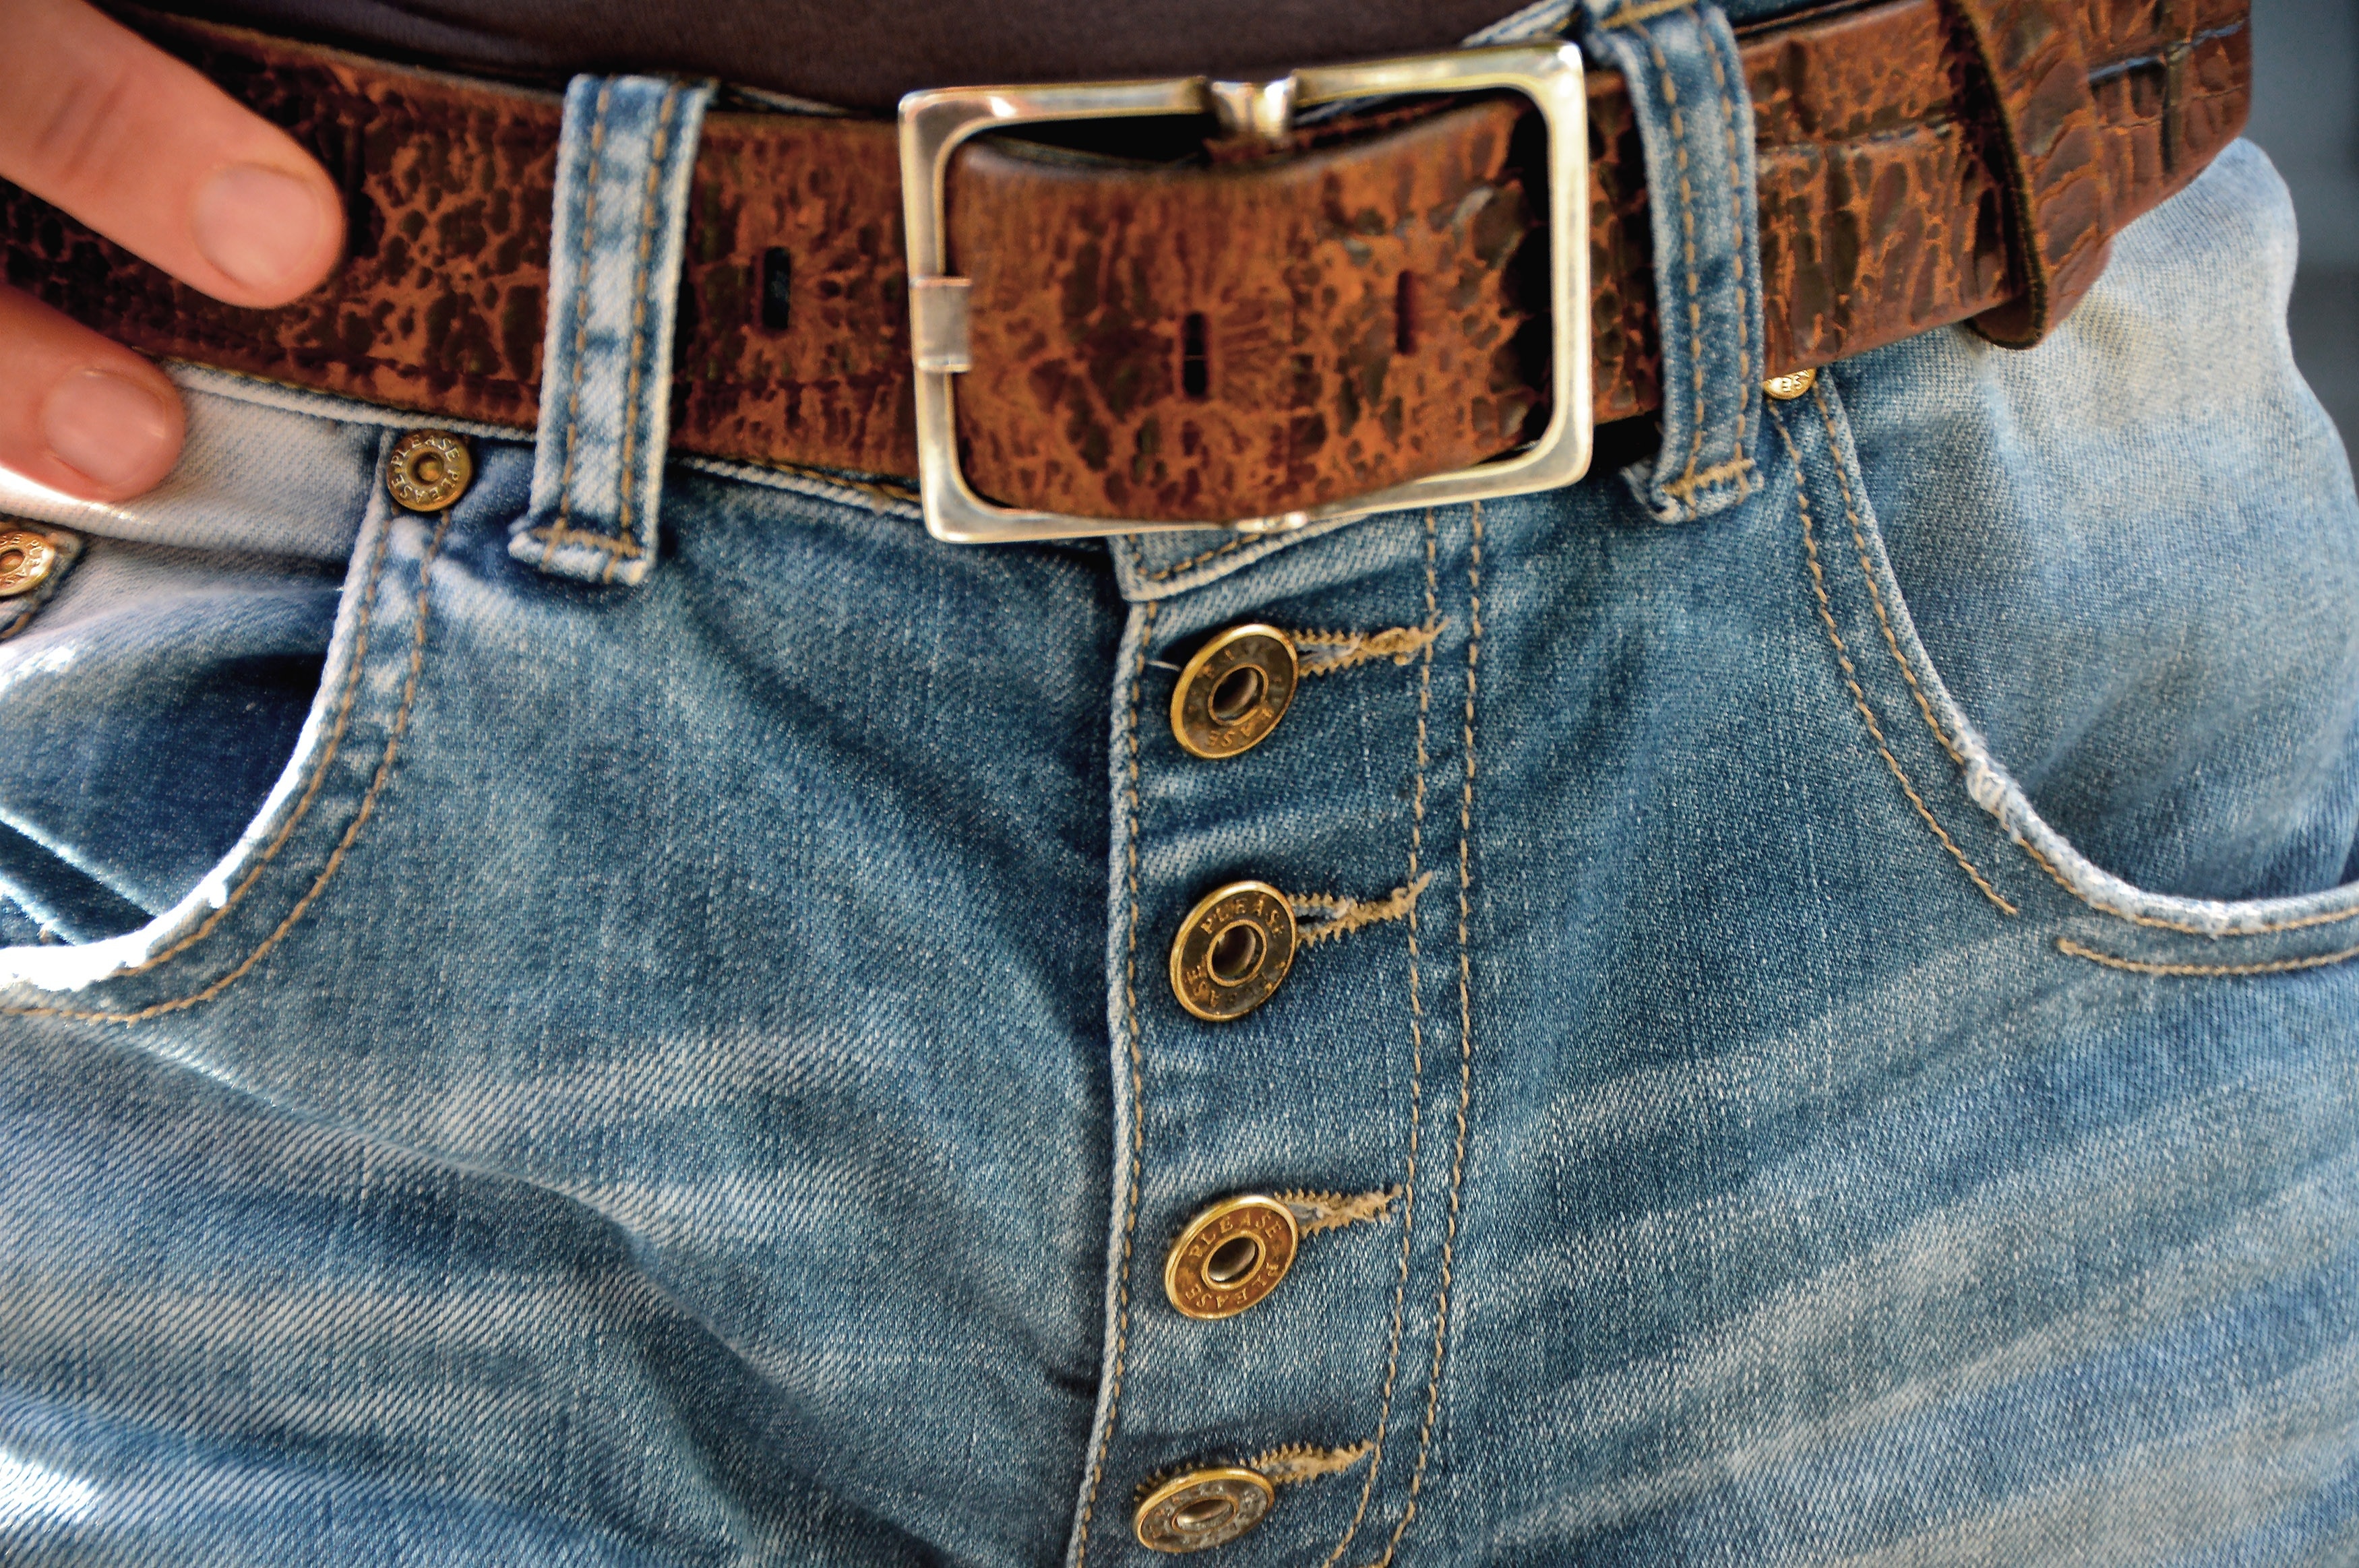 blue faded jeans and brown leather belt